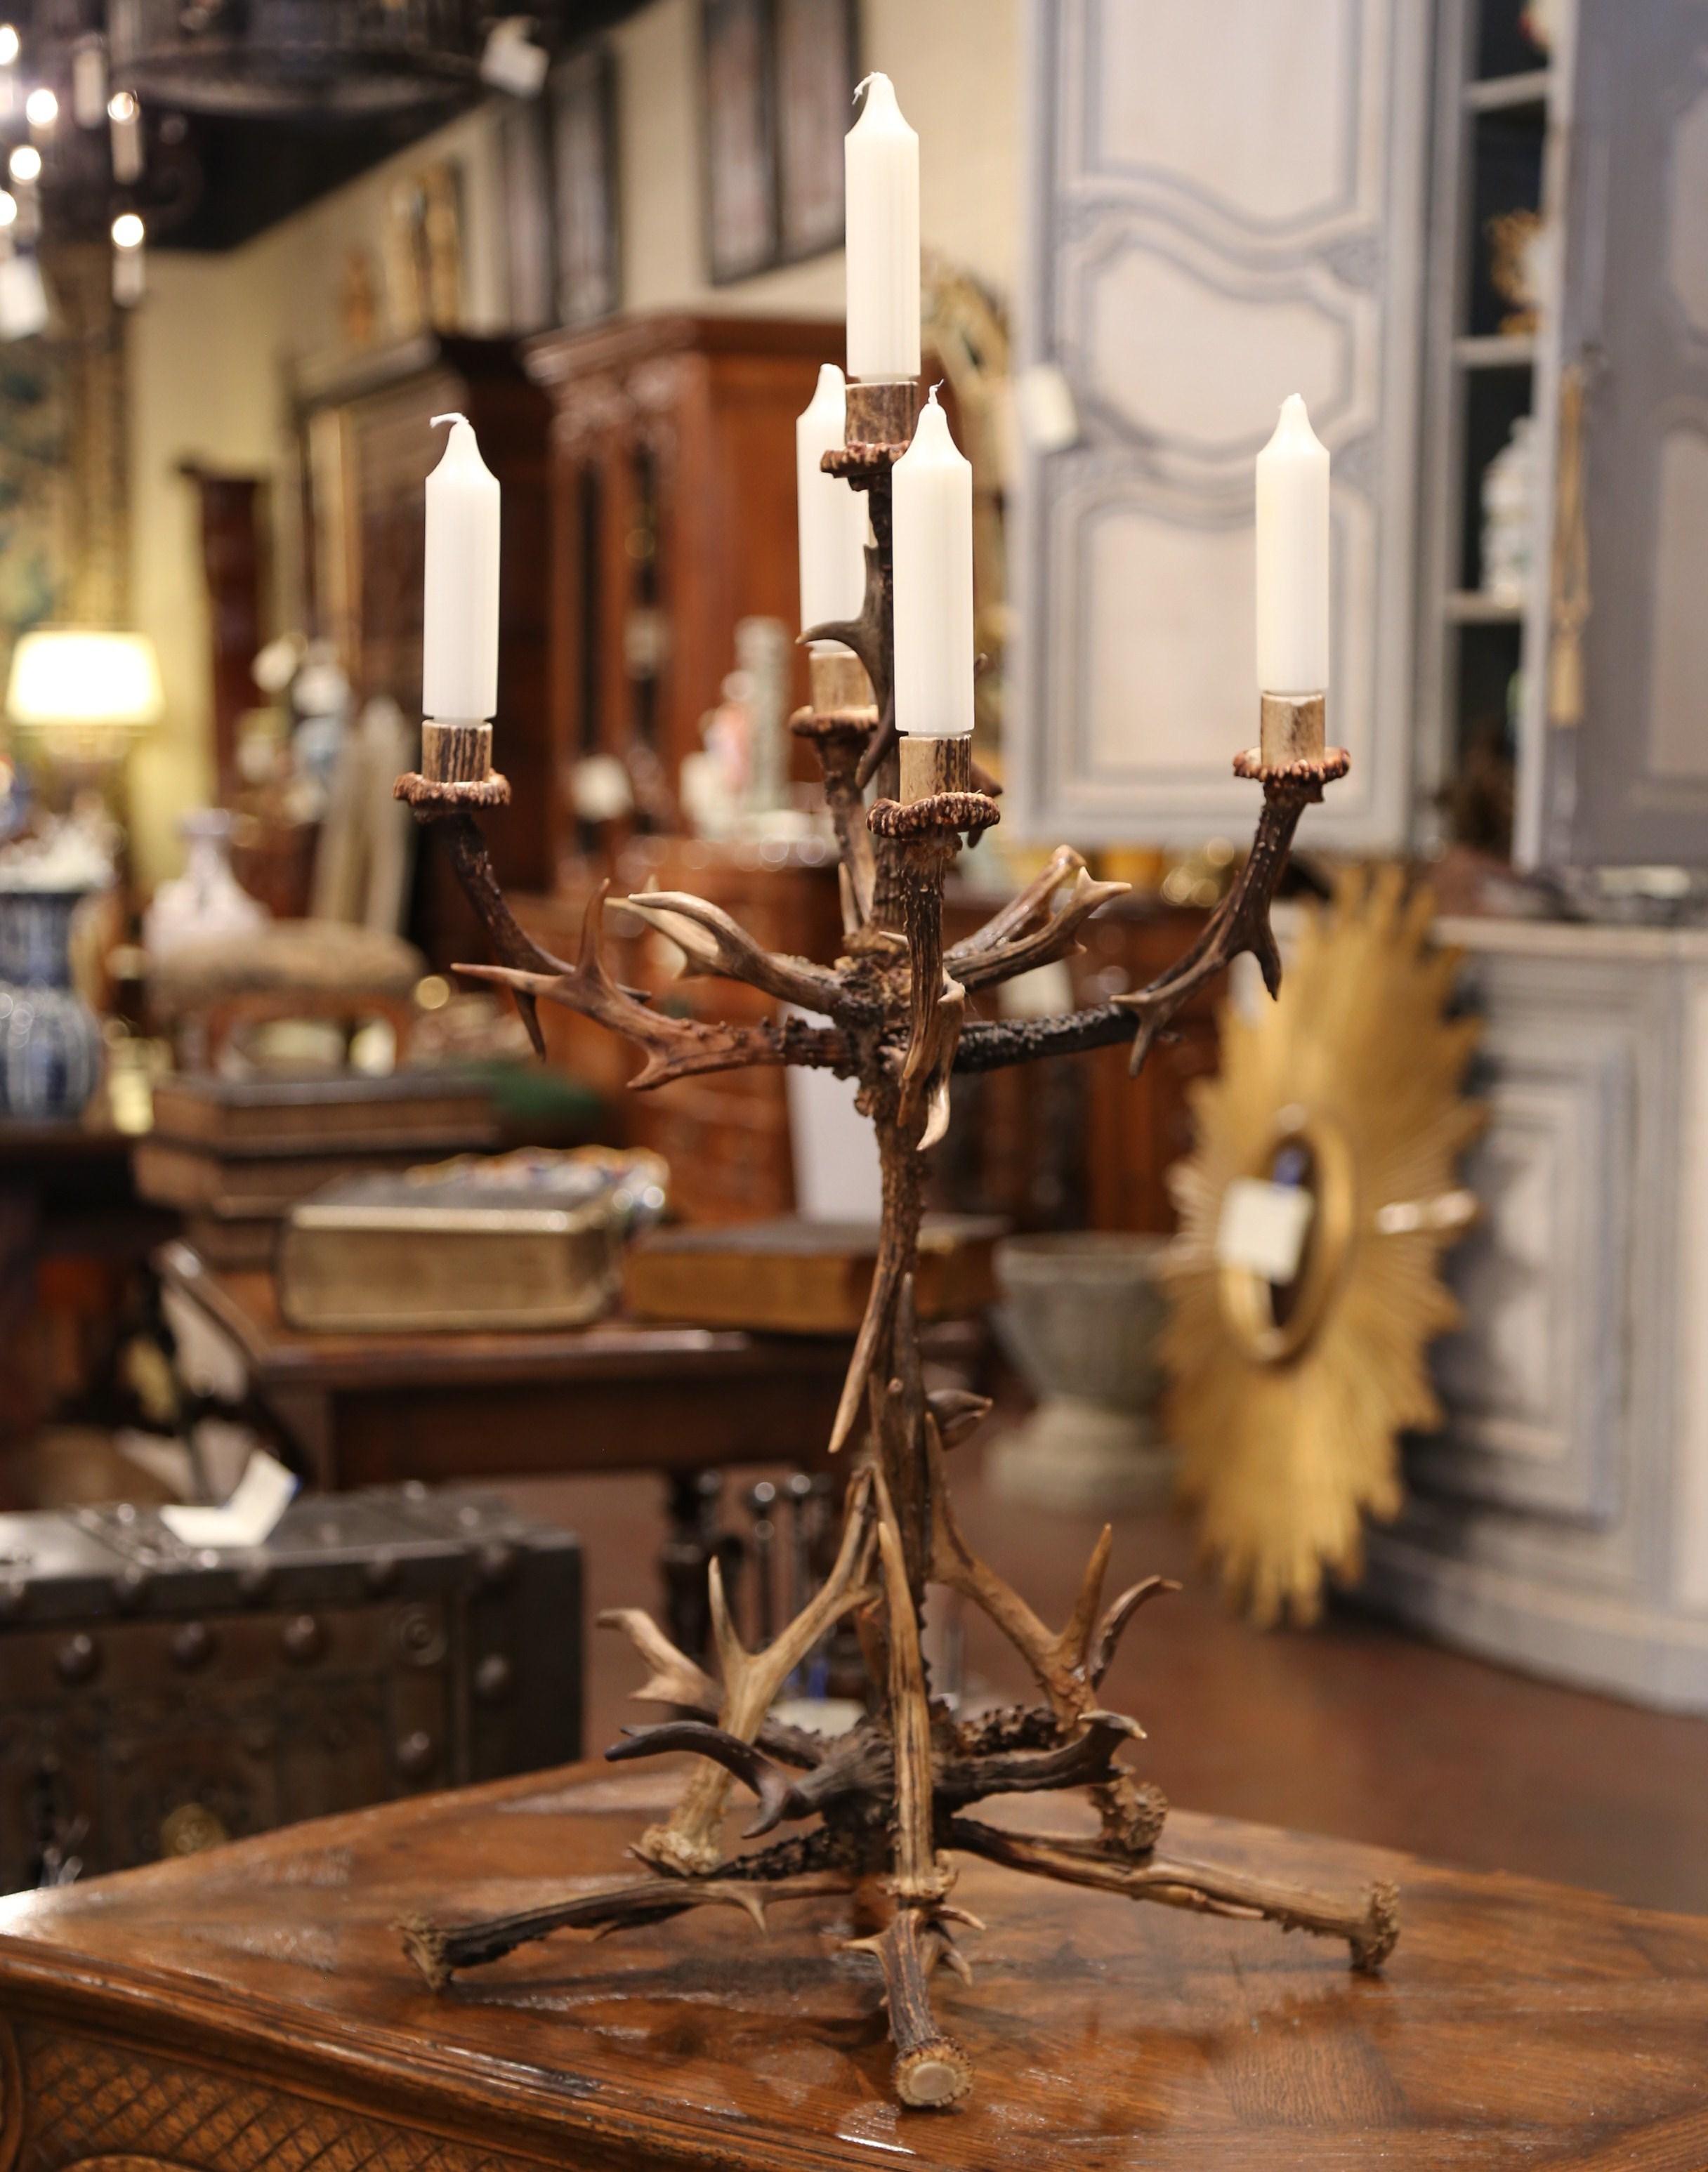 Hand-Crafted Midcentury Five-Arm Candelabra Made with Deer Antlers